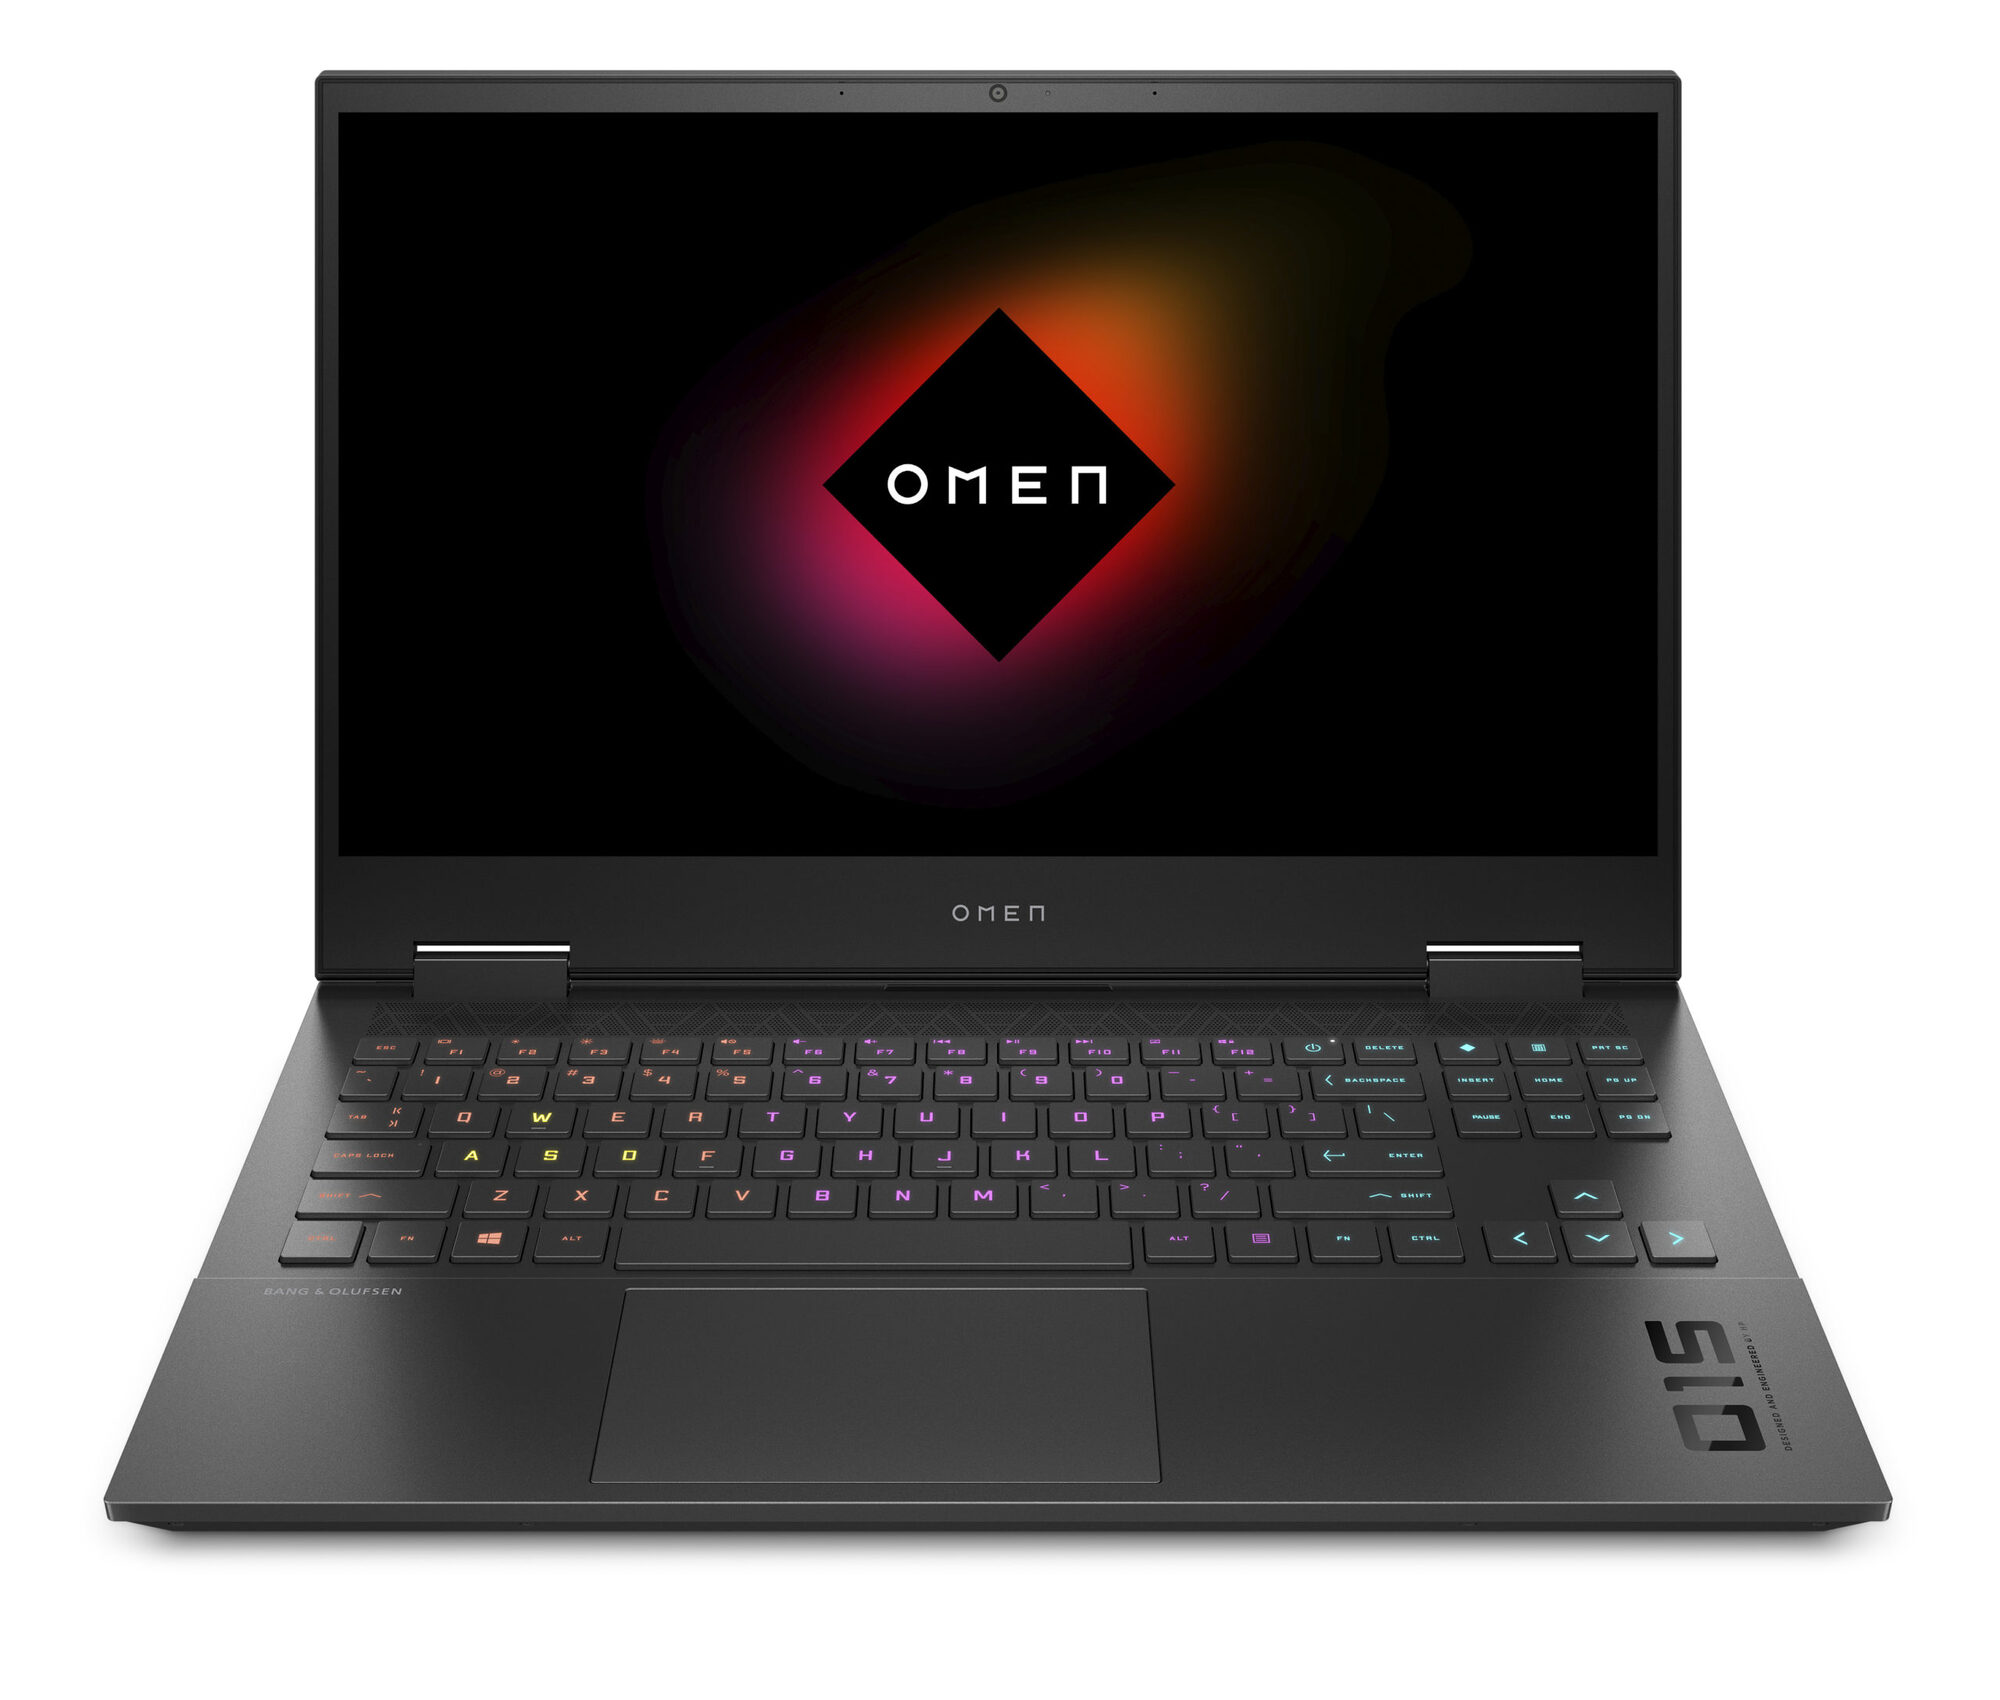 HP reimagines OMEN 15 laptop and introduces Pavilion Gaming 16 be8d761951928ac75b583b8e687ae493-scaled.jpg